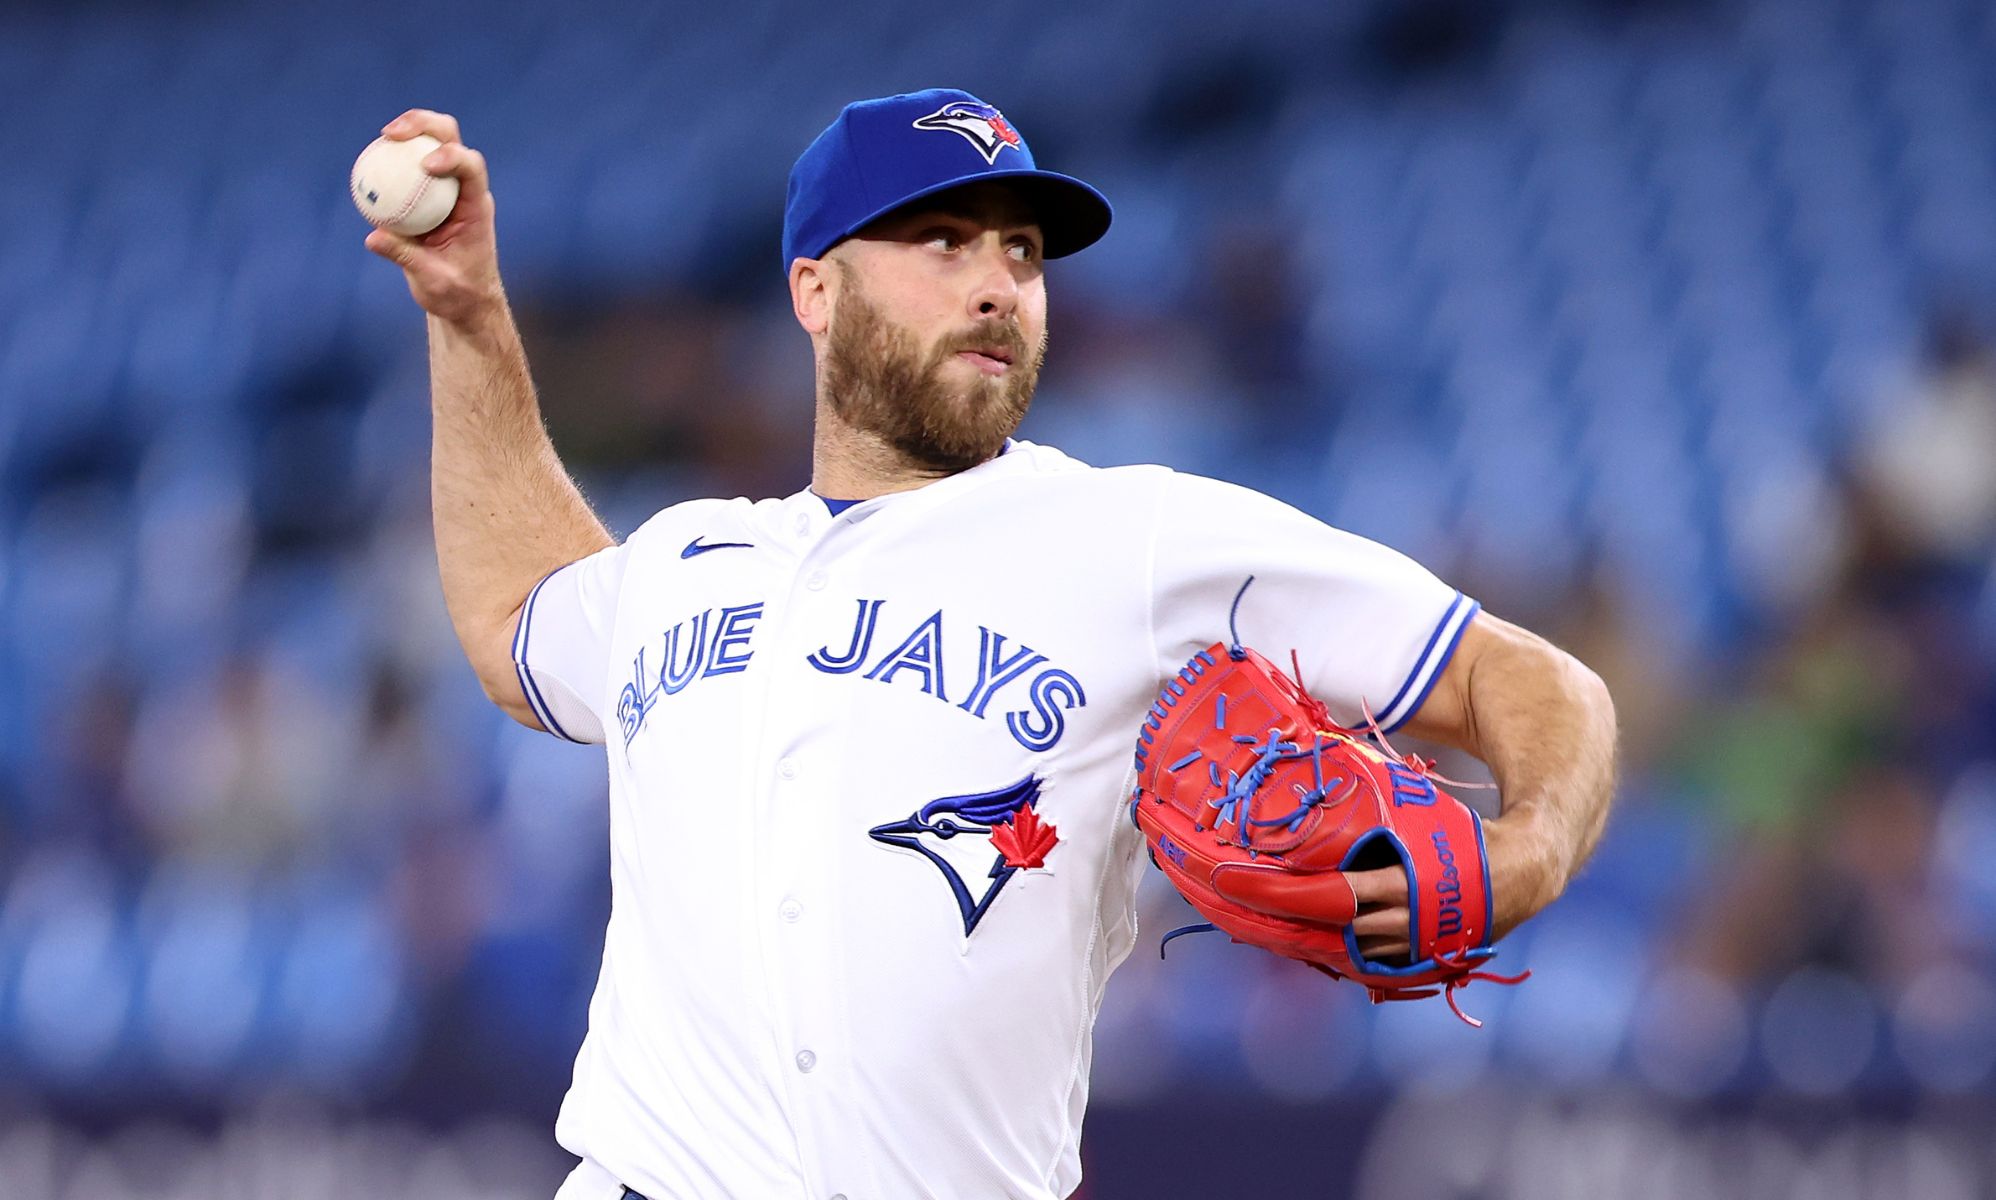 Blue Jays fans boo Anthony Bass for sharing anti-LGBTQ video